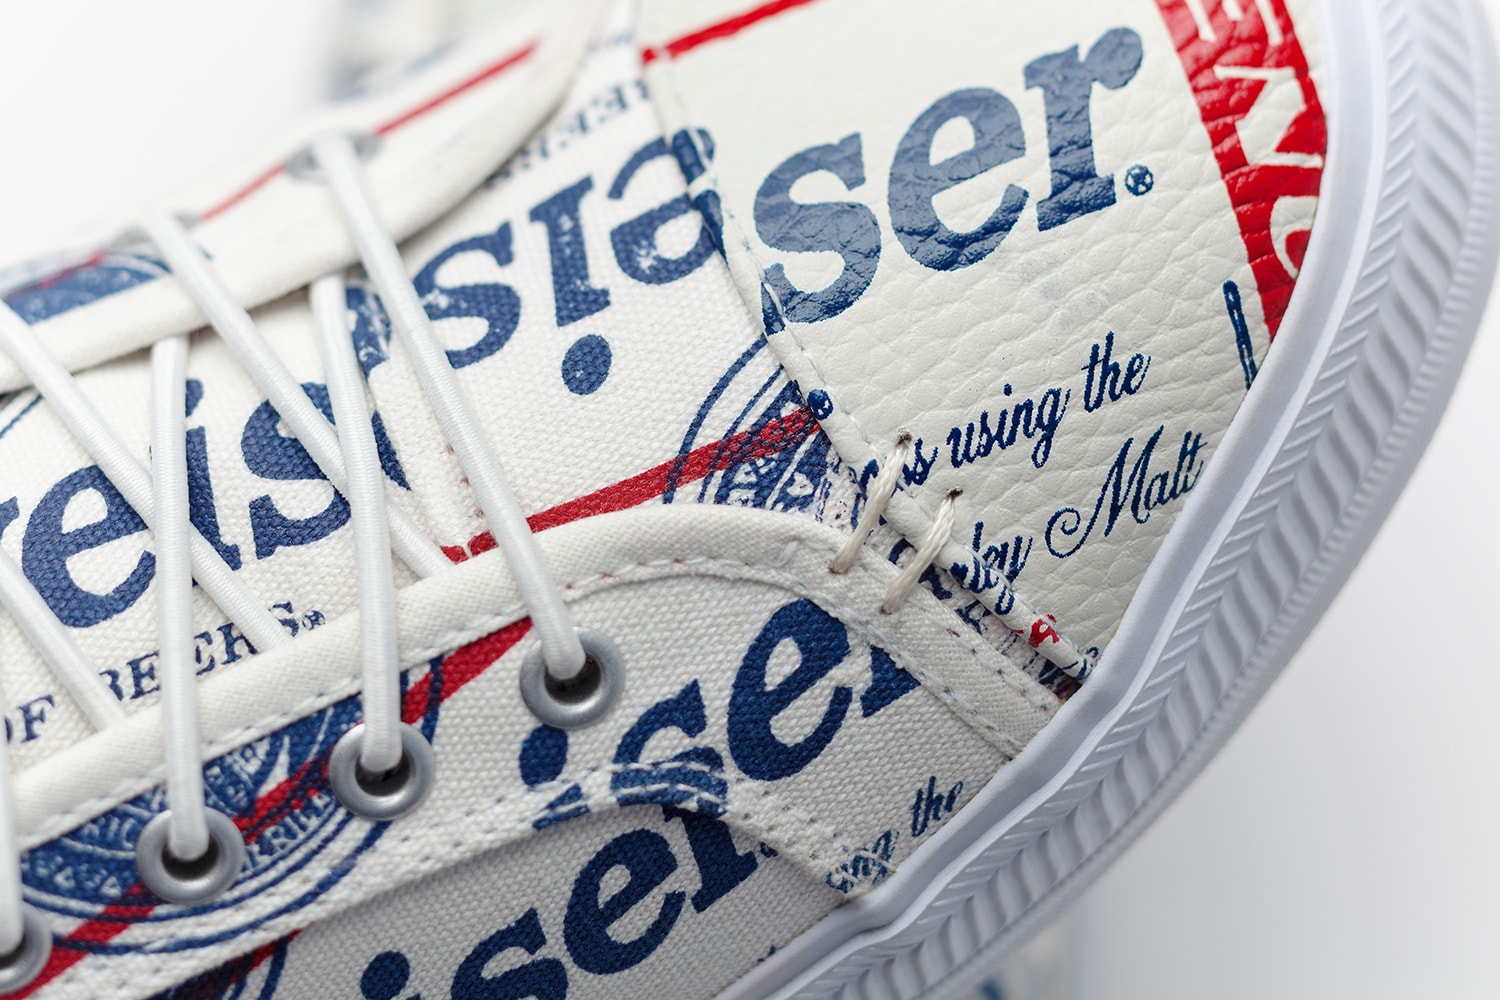 Budweiser x ALIFE x Greats' Wilson Sneaker, beer, canvas, logo, red, blue, america, classic